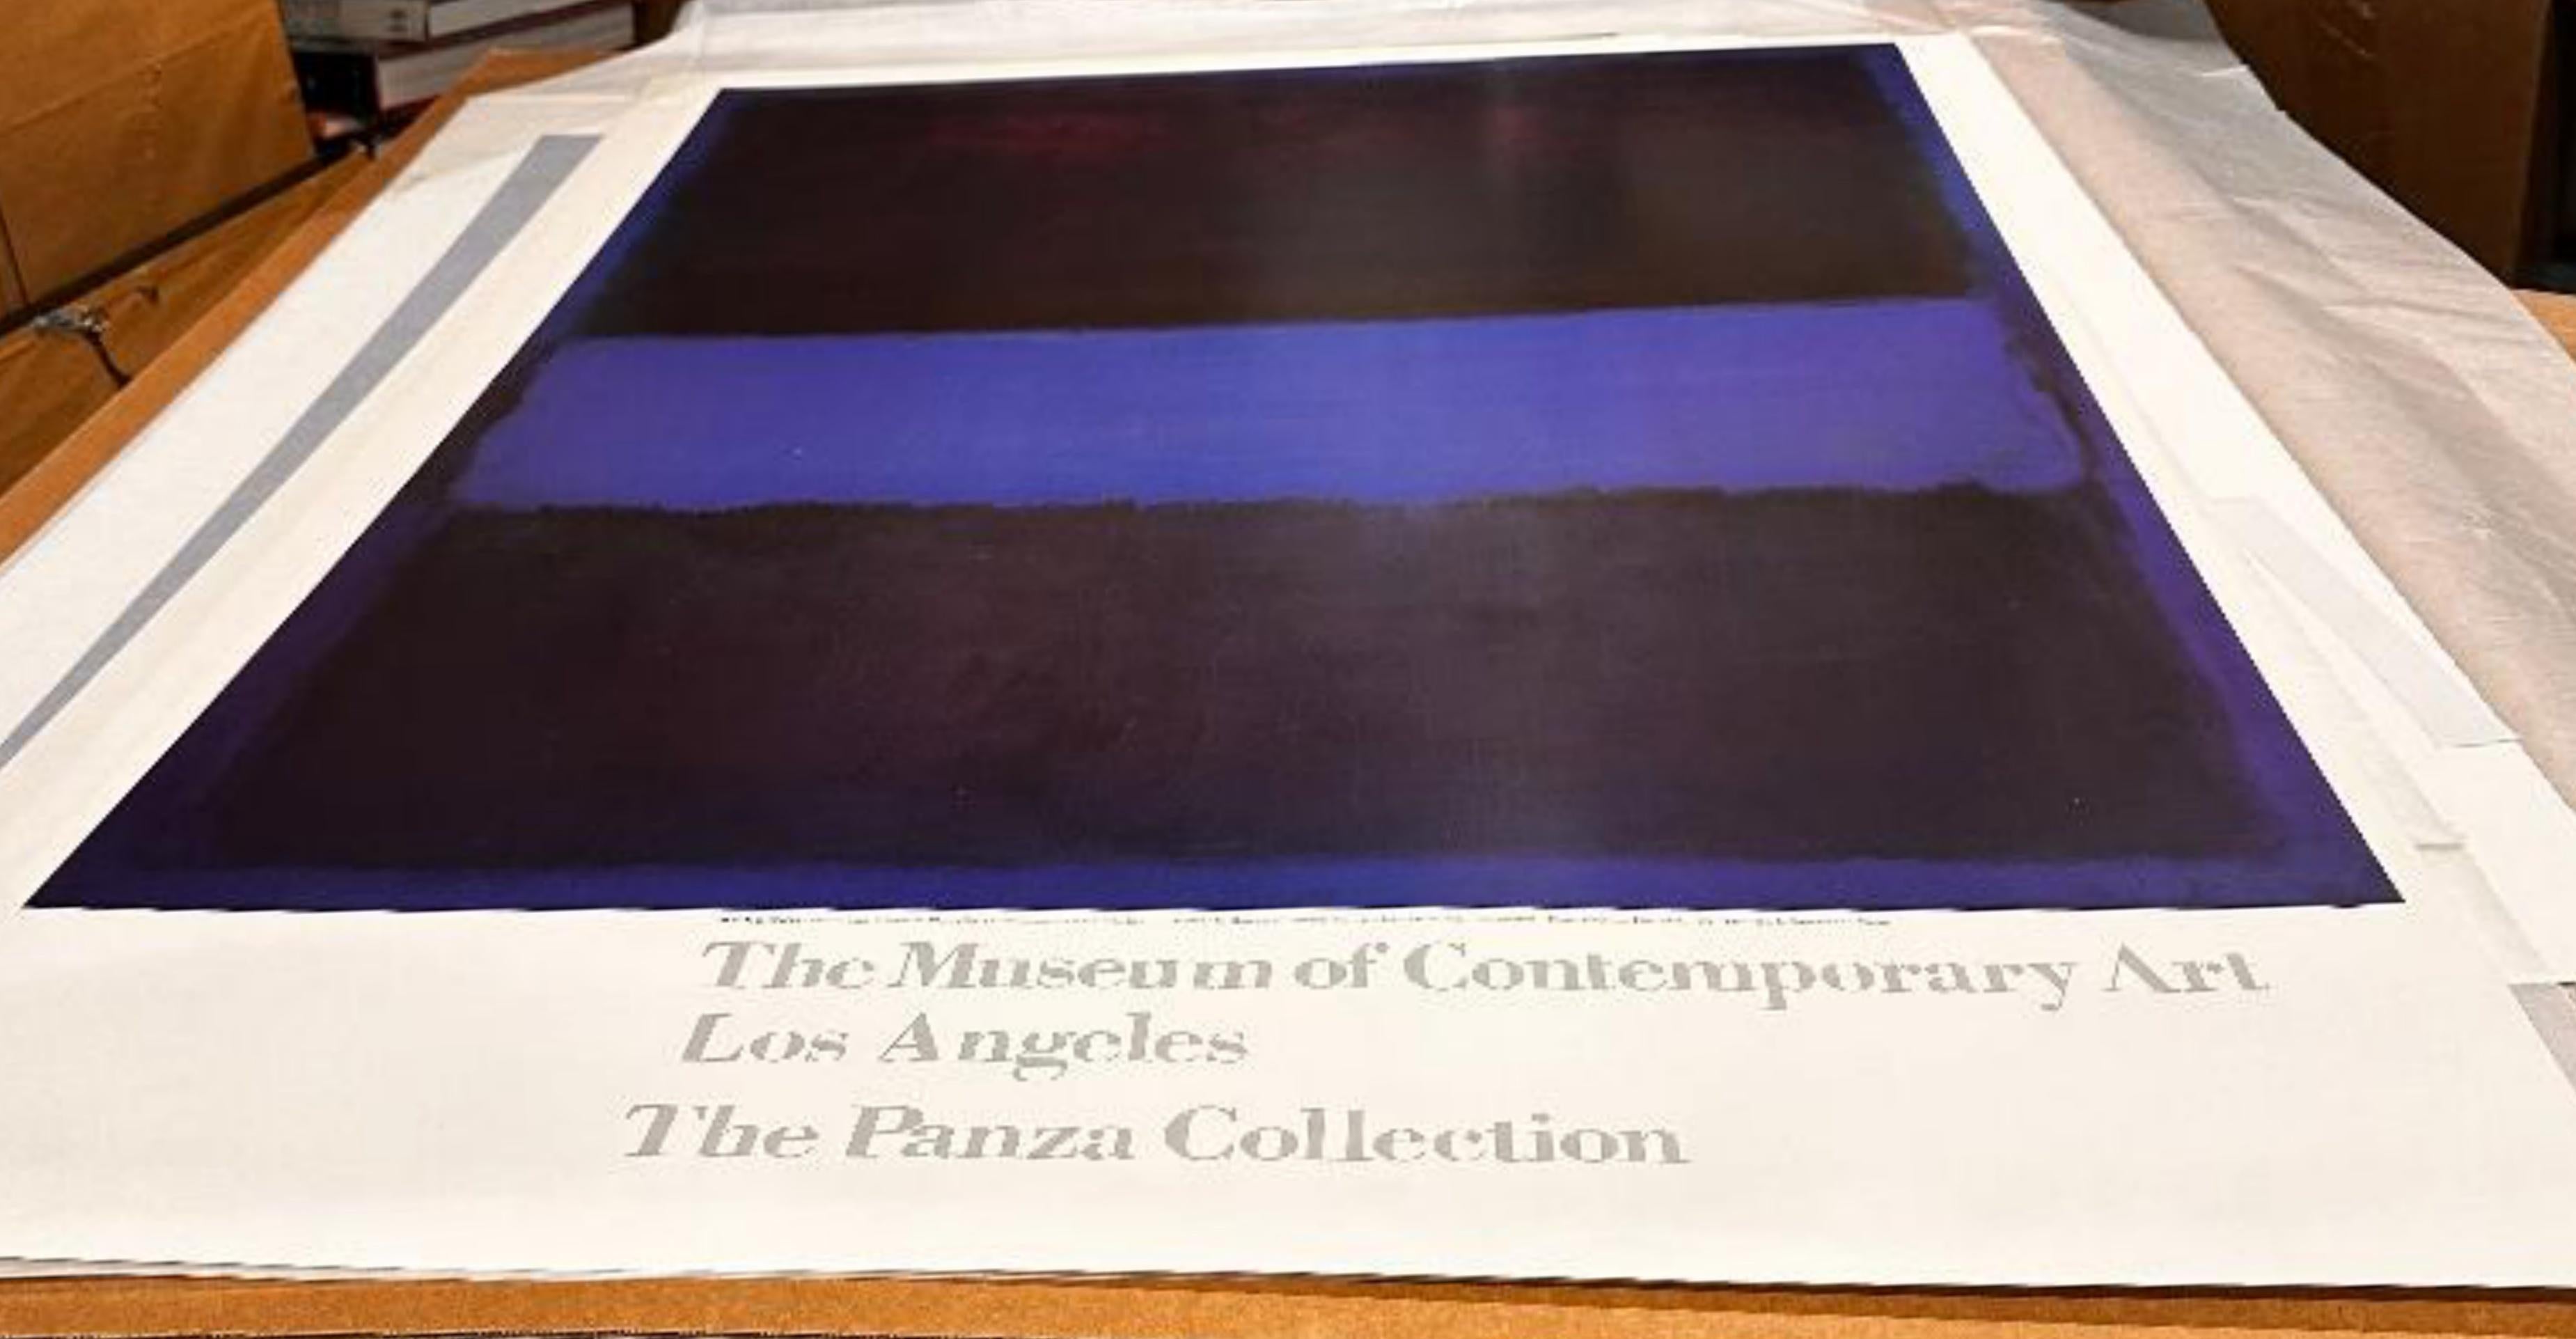 Museum of Contemporary Art Los Angeles, Limited Edition Panza Collection poster 1